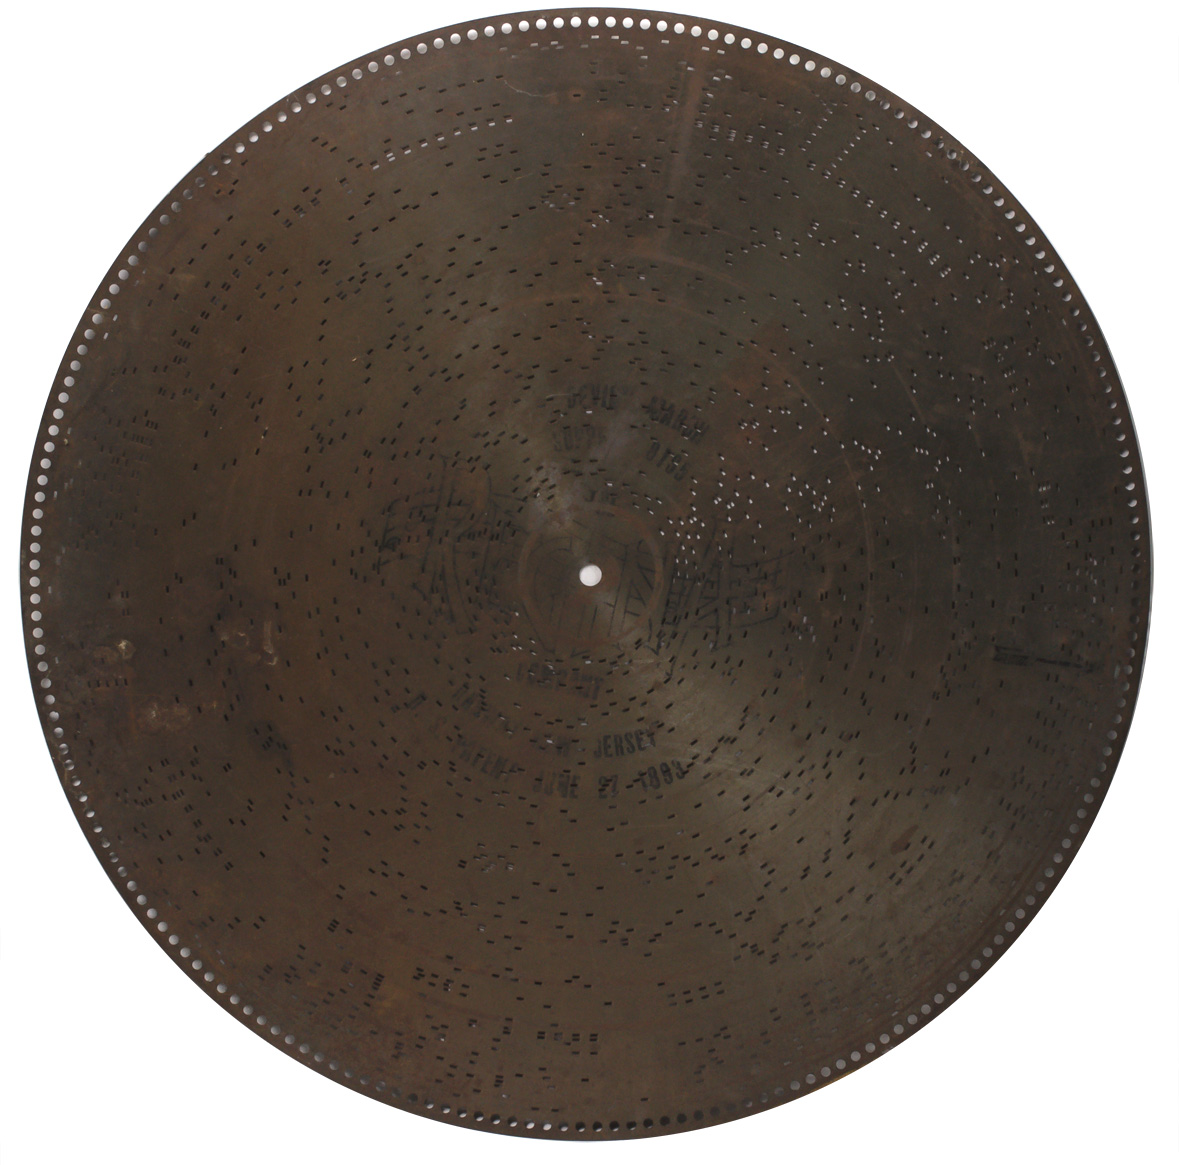 Huge steel disc with punched-out pins for Regina Concerto music box